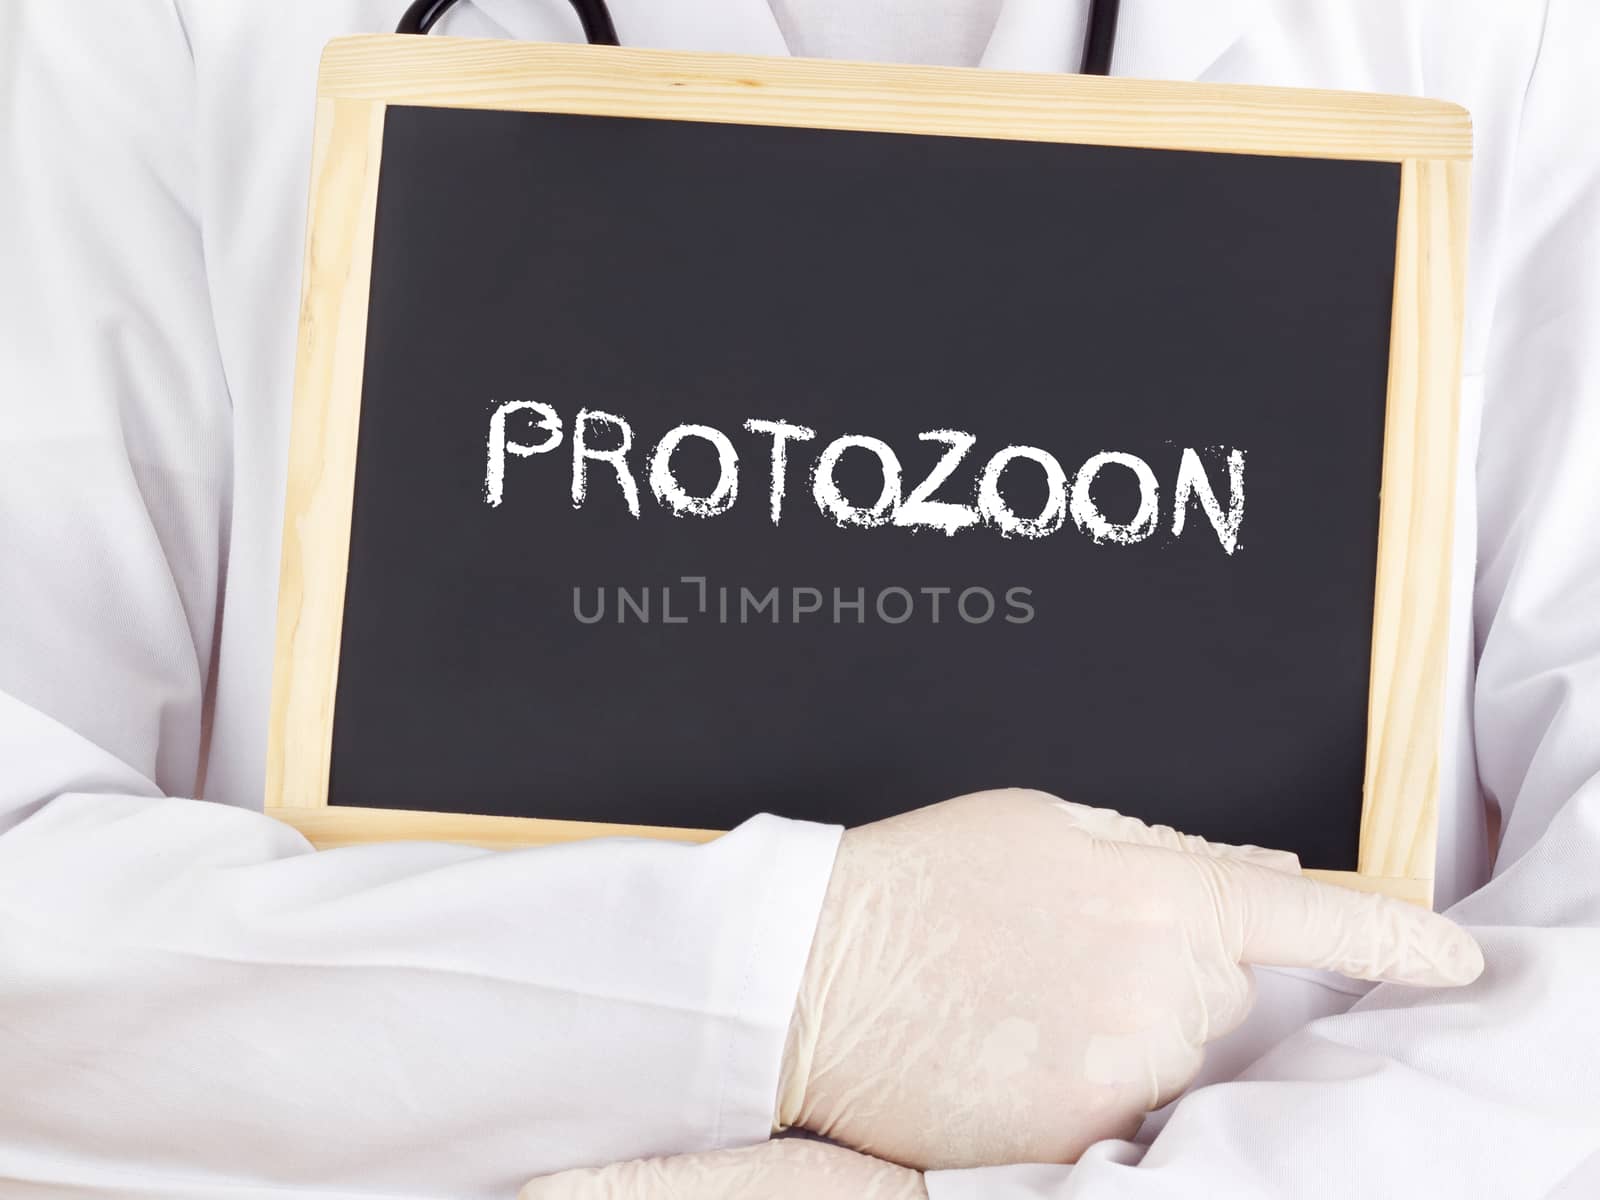 Doctor shows information: protozoon by gwolters